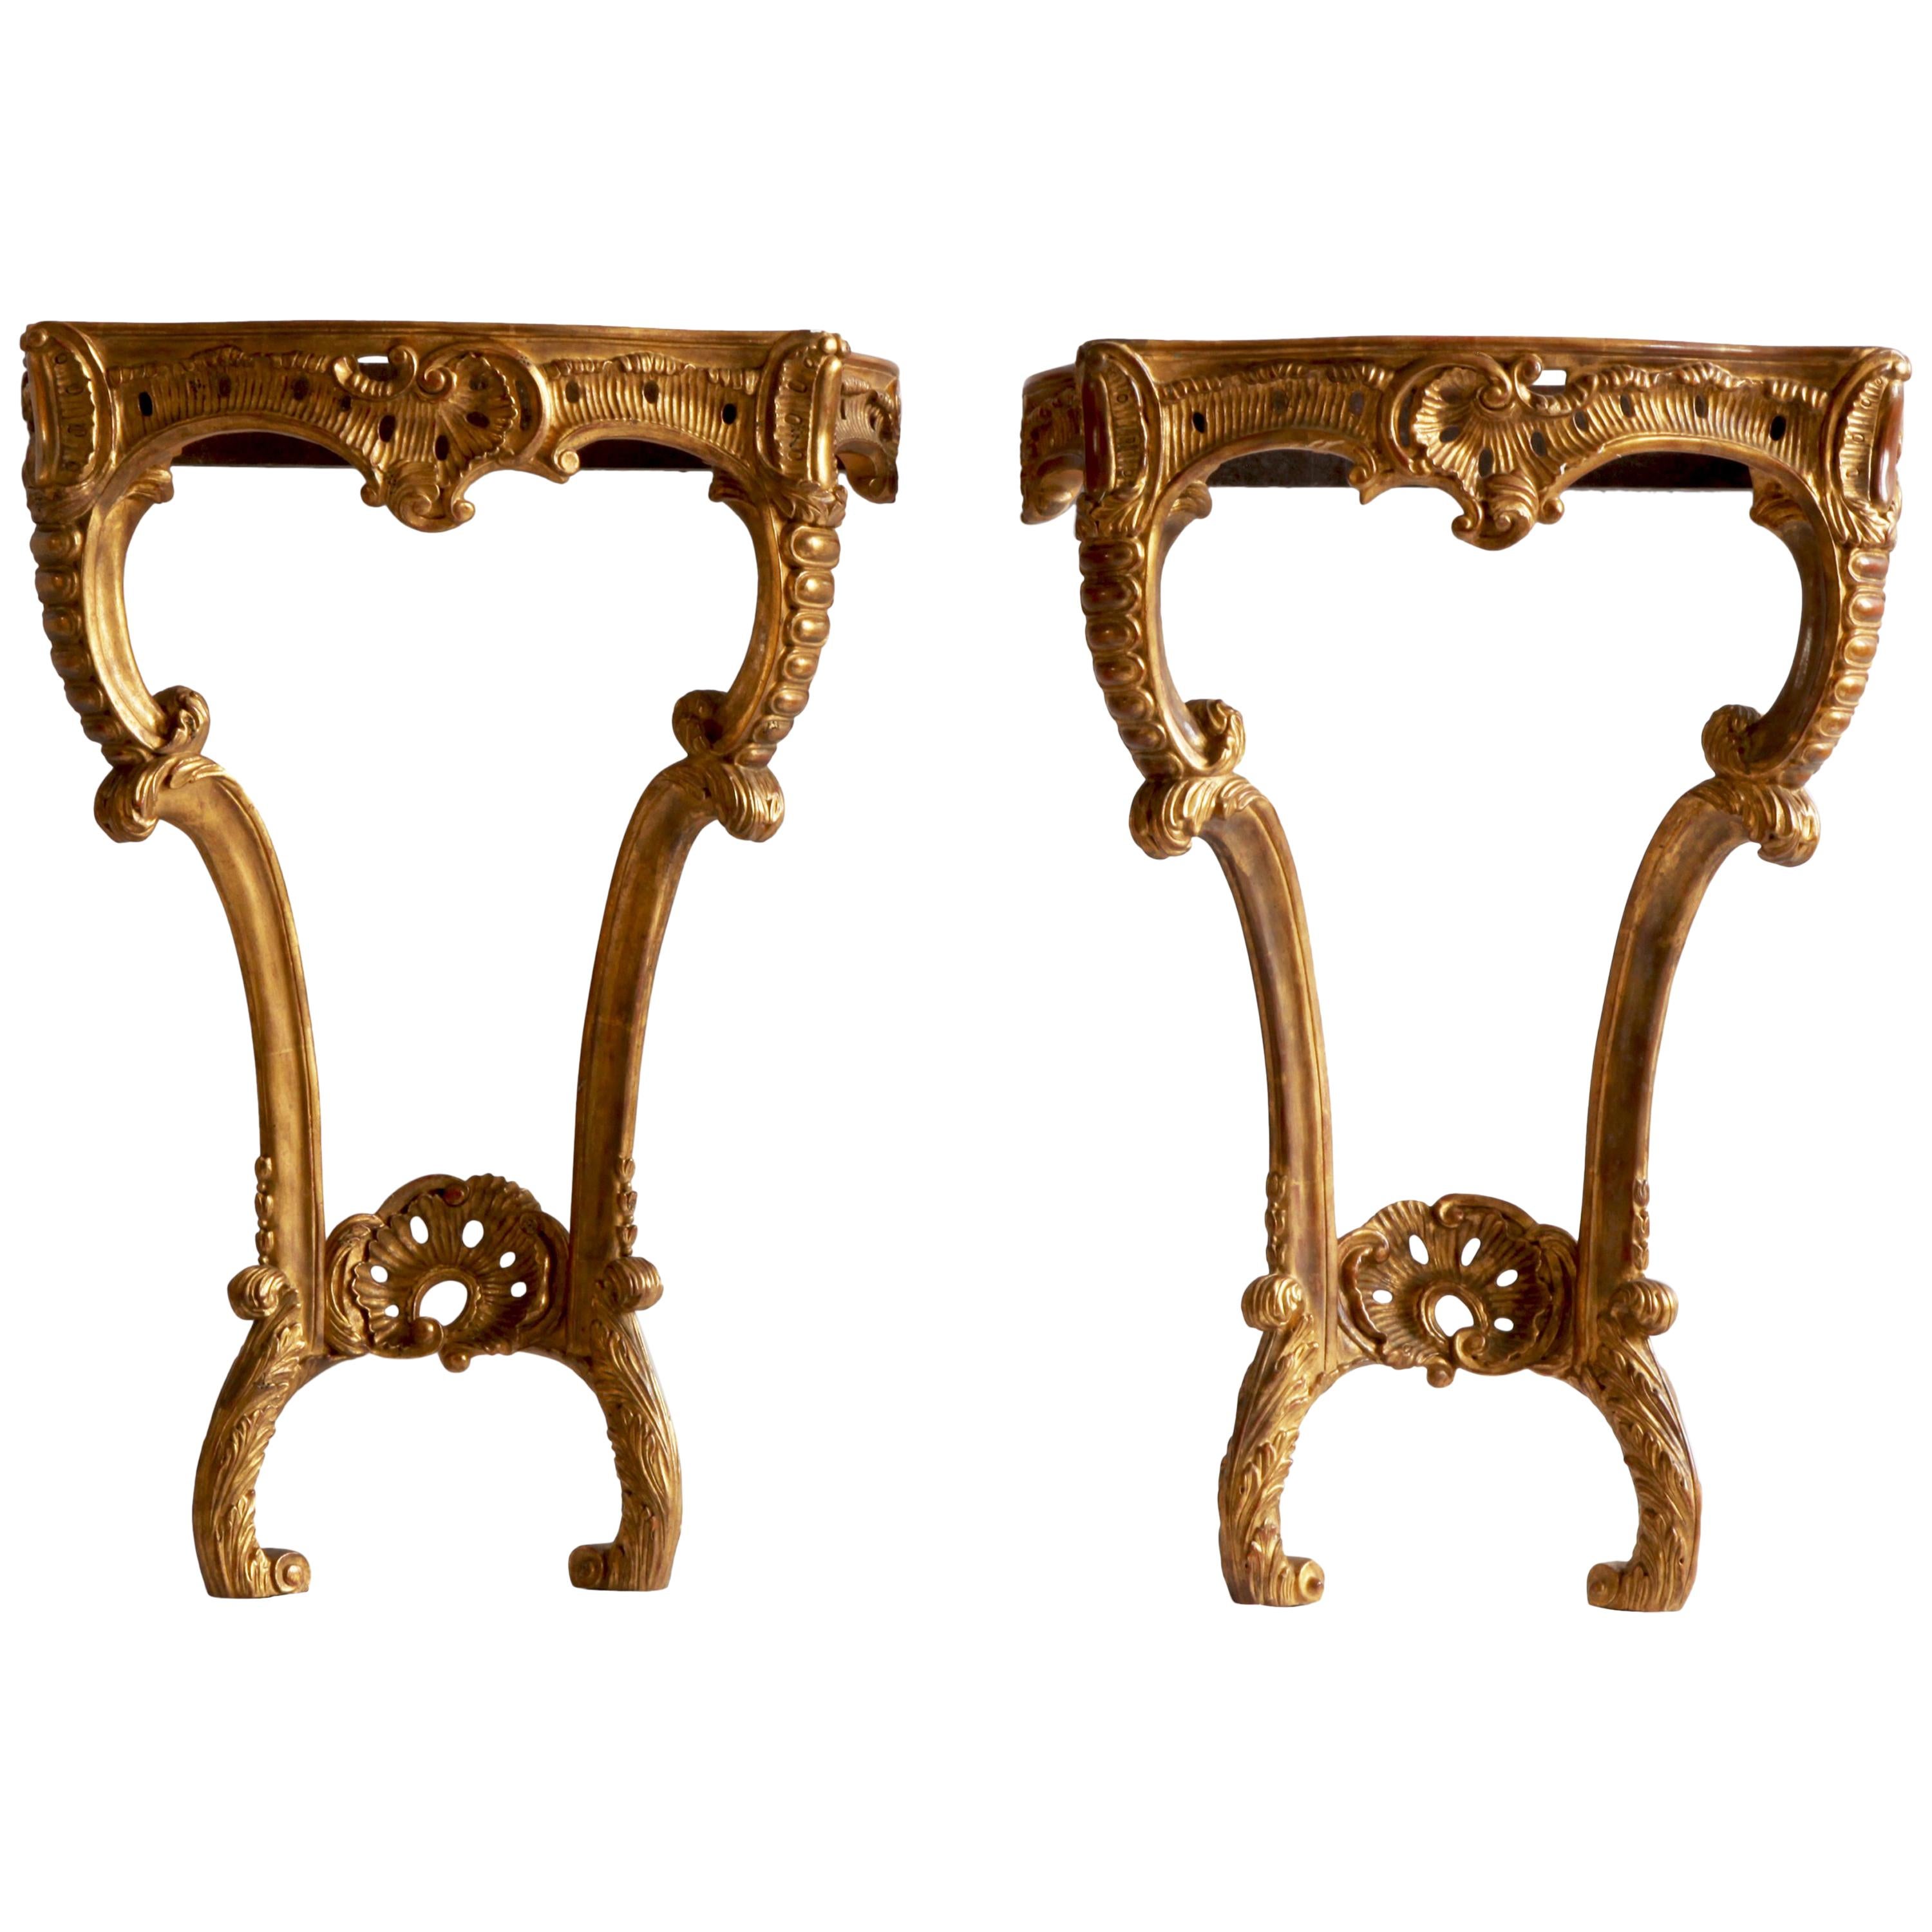 Pair of Hand Carved Rococo Style Giltwood Consoles Made by La Maison London